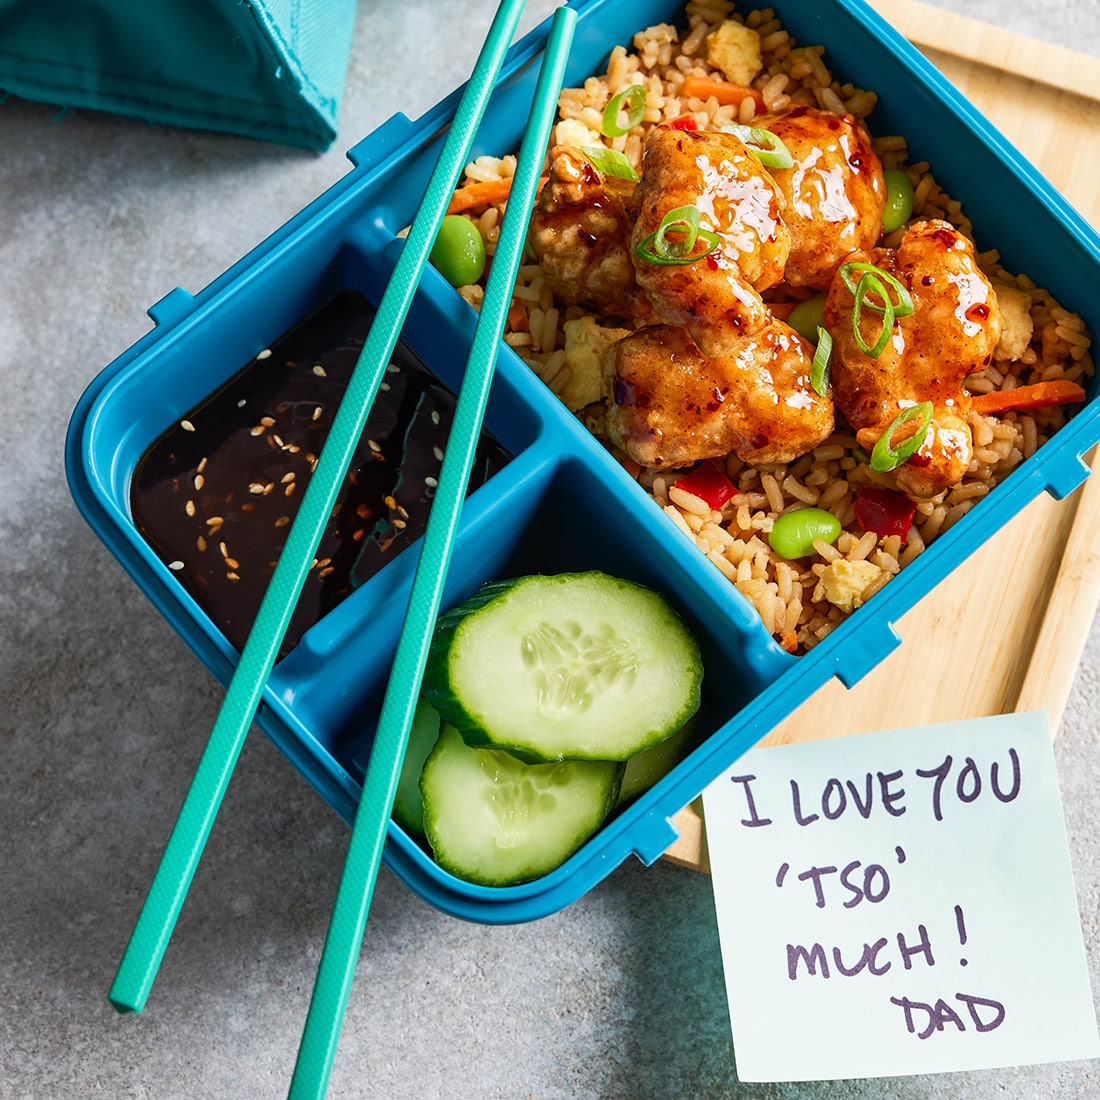 A close-up of a colorful bento box lunch containing InnovAsian General Tso's Chicken over Vegetable Fried Rice with cucumbers and dipping sauce in other sections of the box. A post-it note next to it reads "I love you 'Tso' much! - Dad"